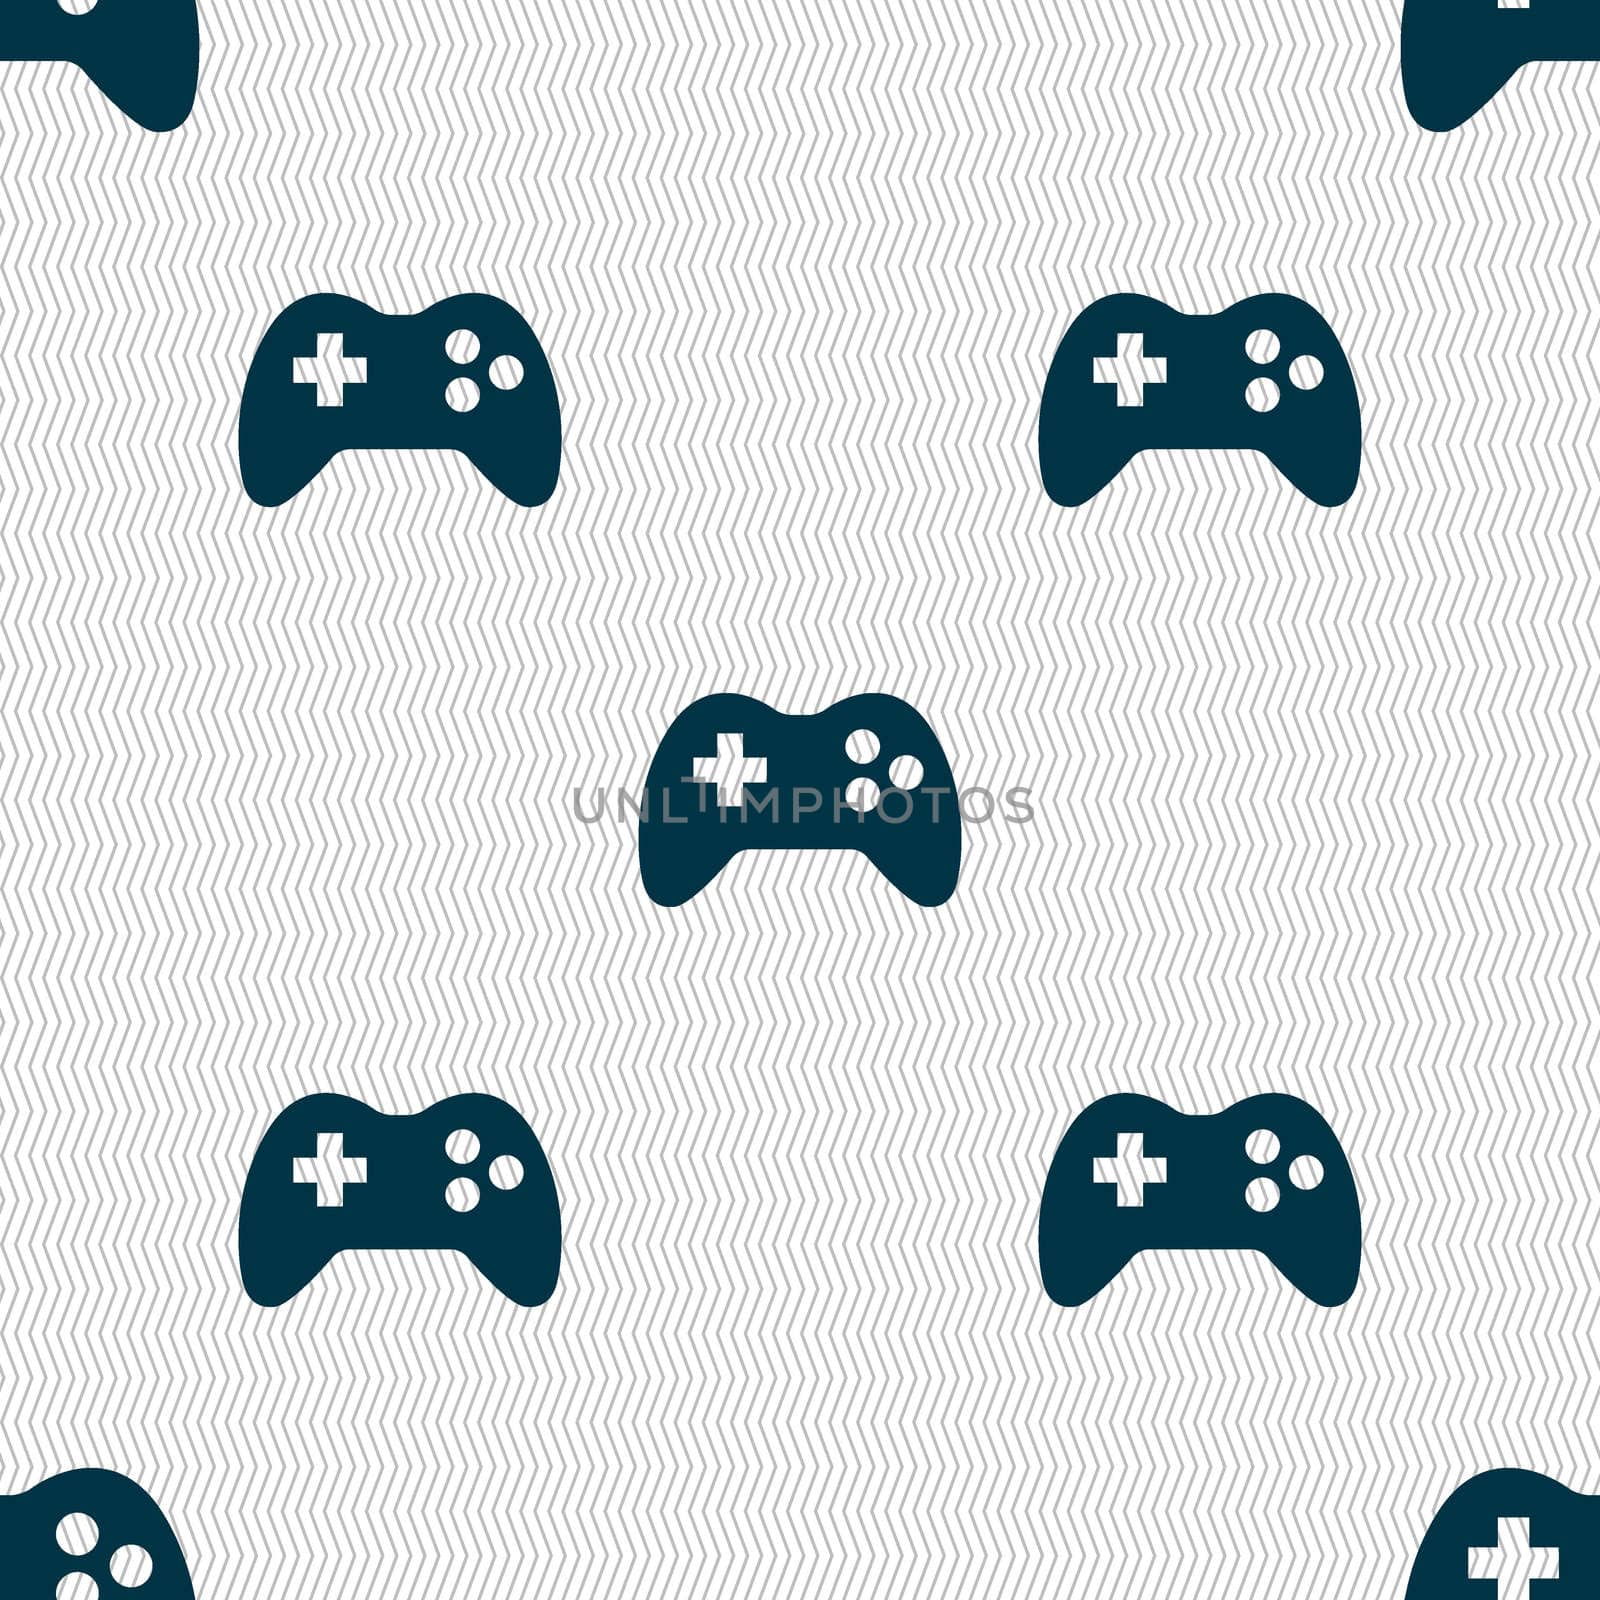 Joystick sign icon. Video game symbol. Seamless abstract background with geometric shapes. illustration